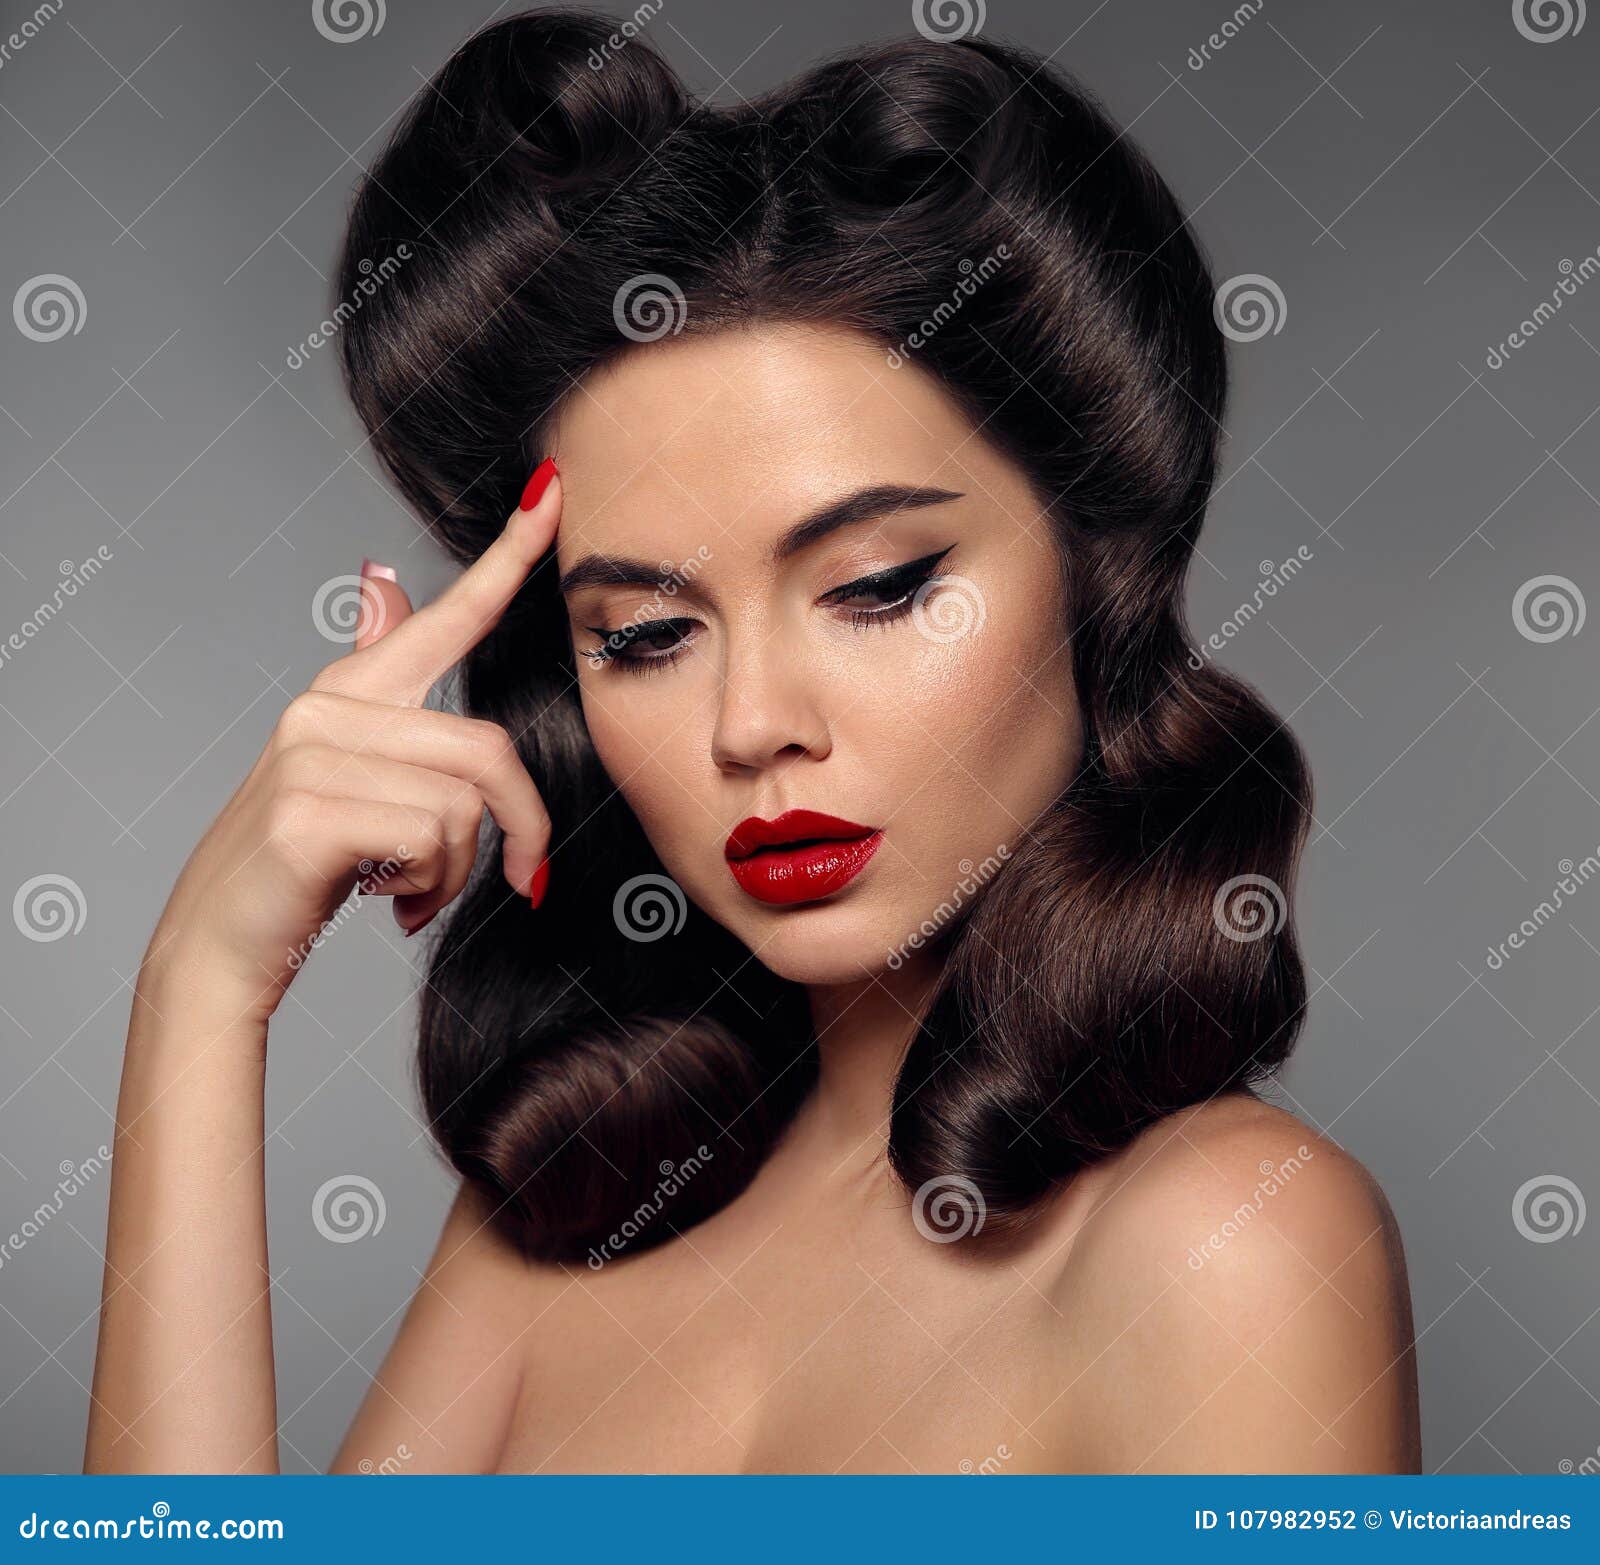 nostalgia. pin up girl with red lips makeup and retro curls hair